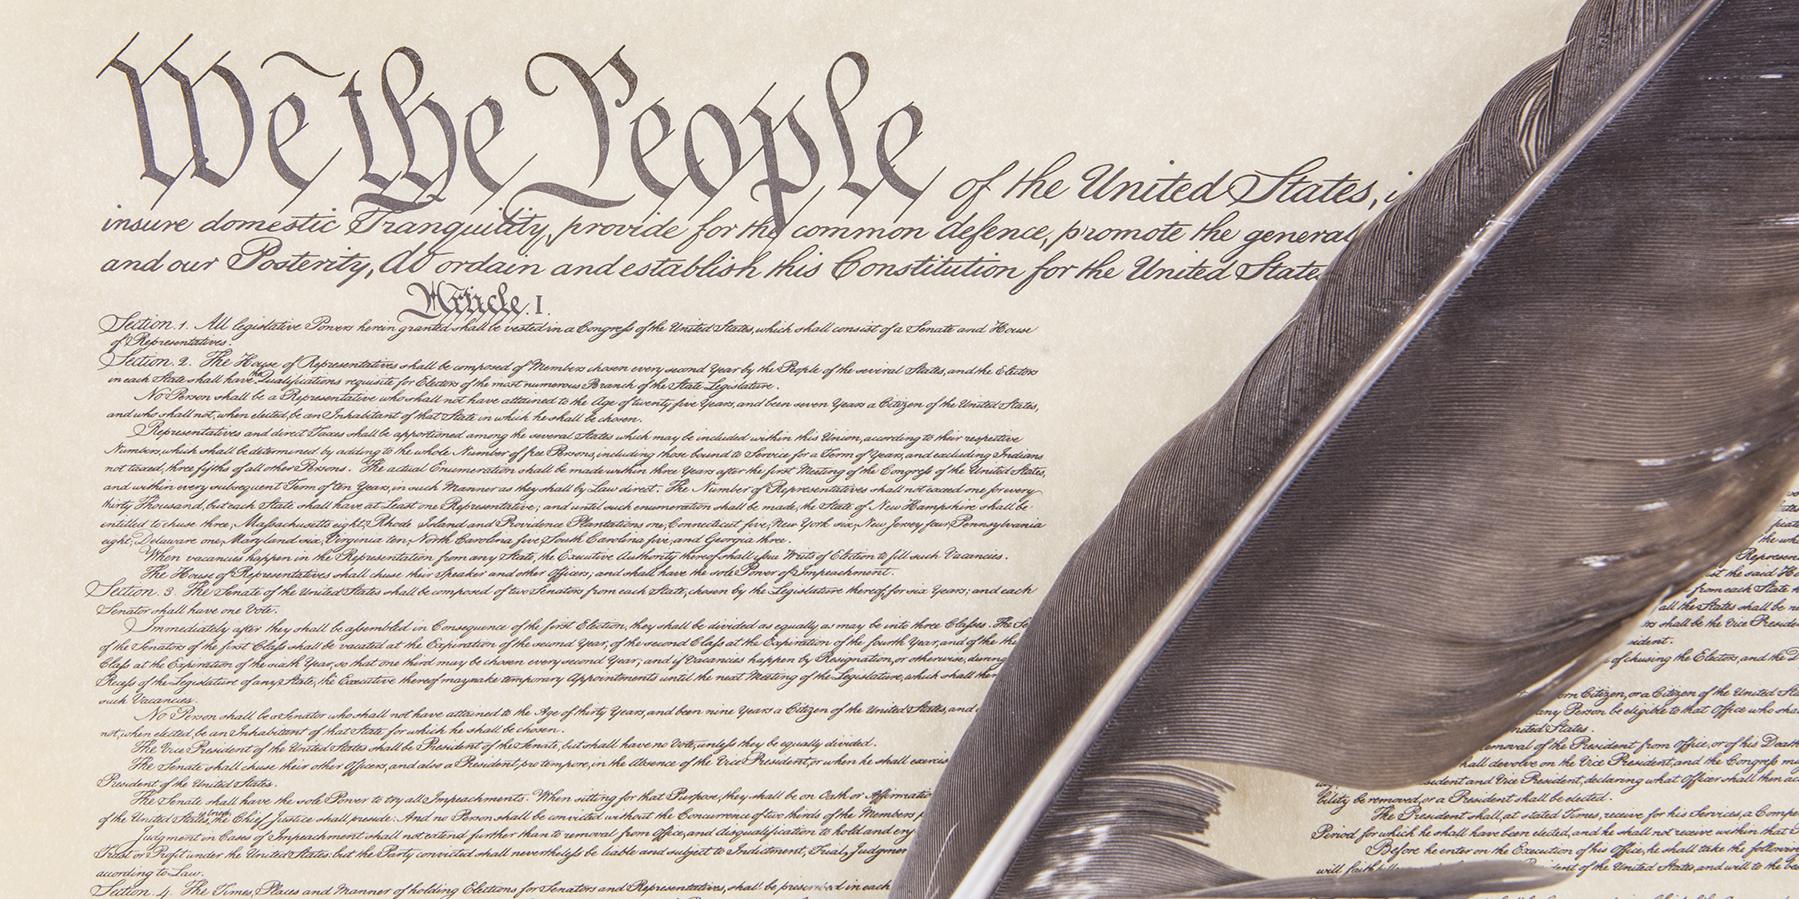 Sketch of the US Constitution's preamble and first article, with a feather quill laying over the document